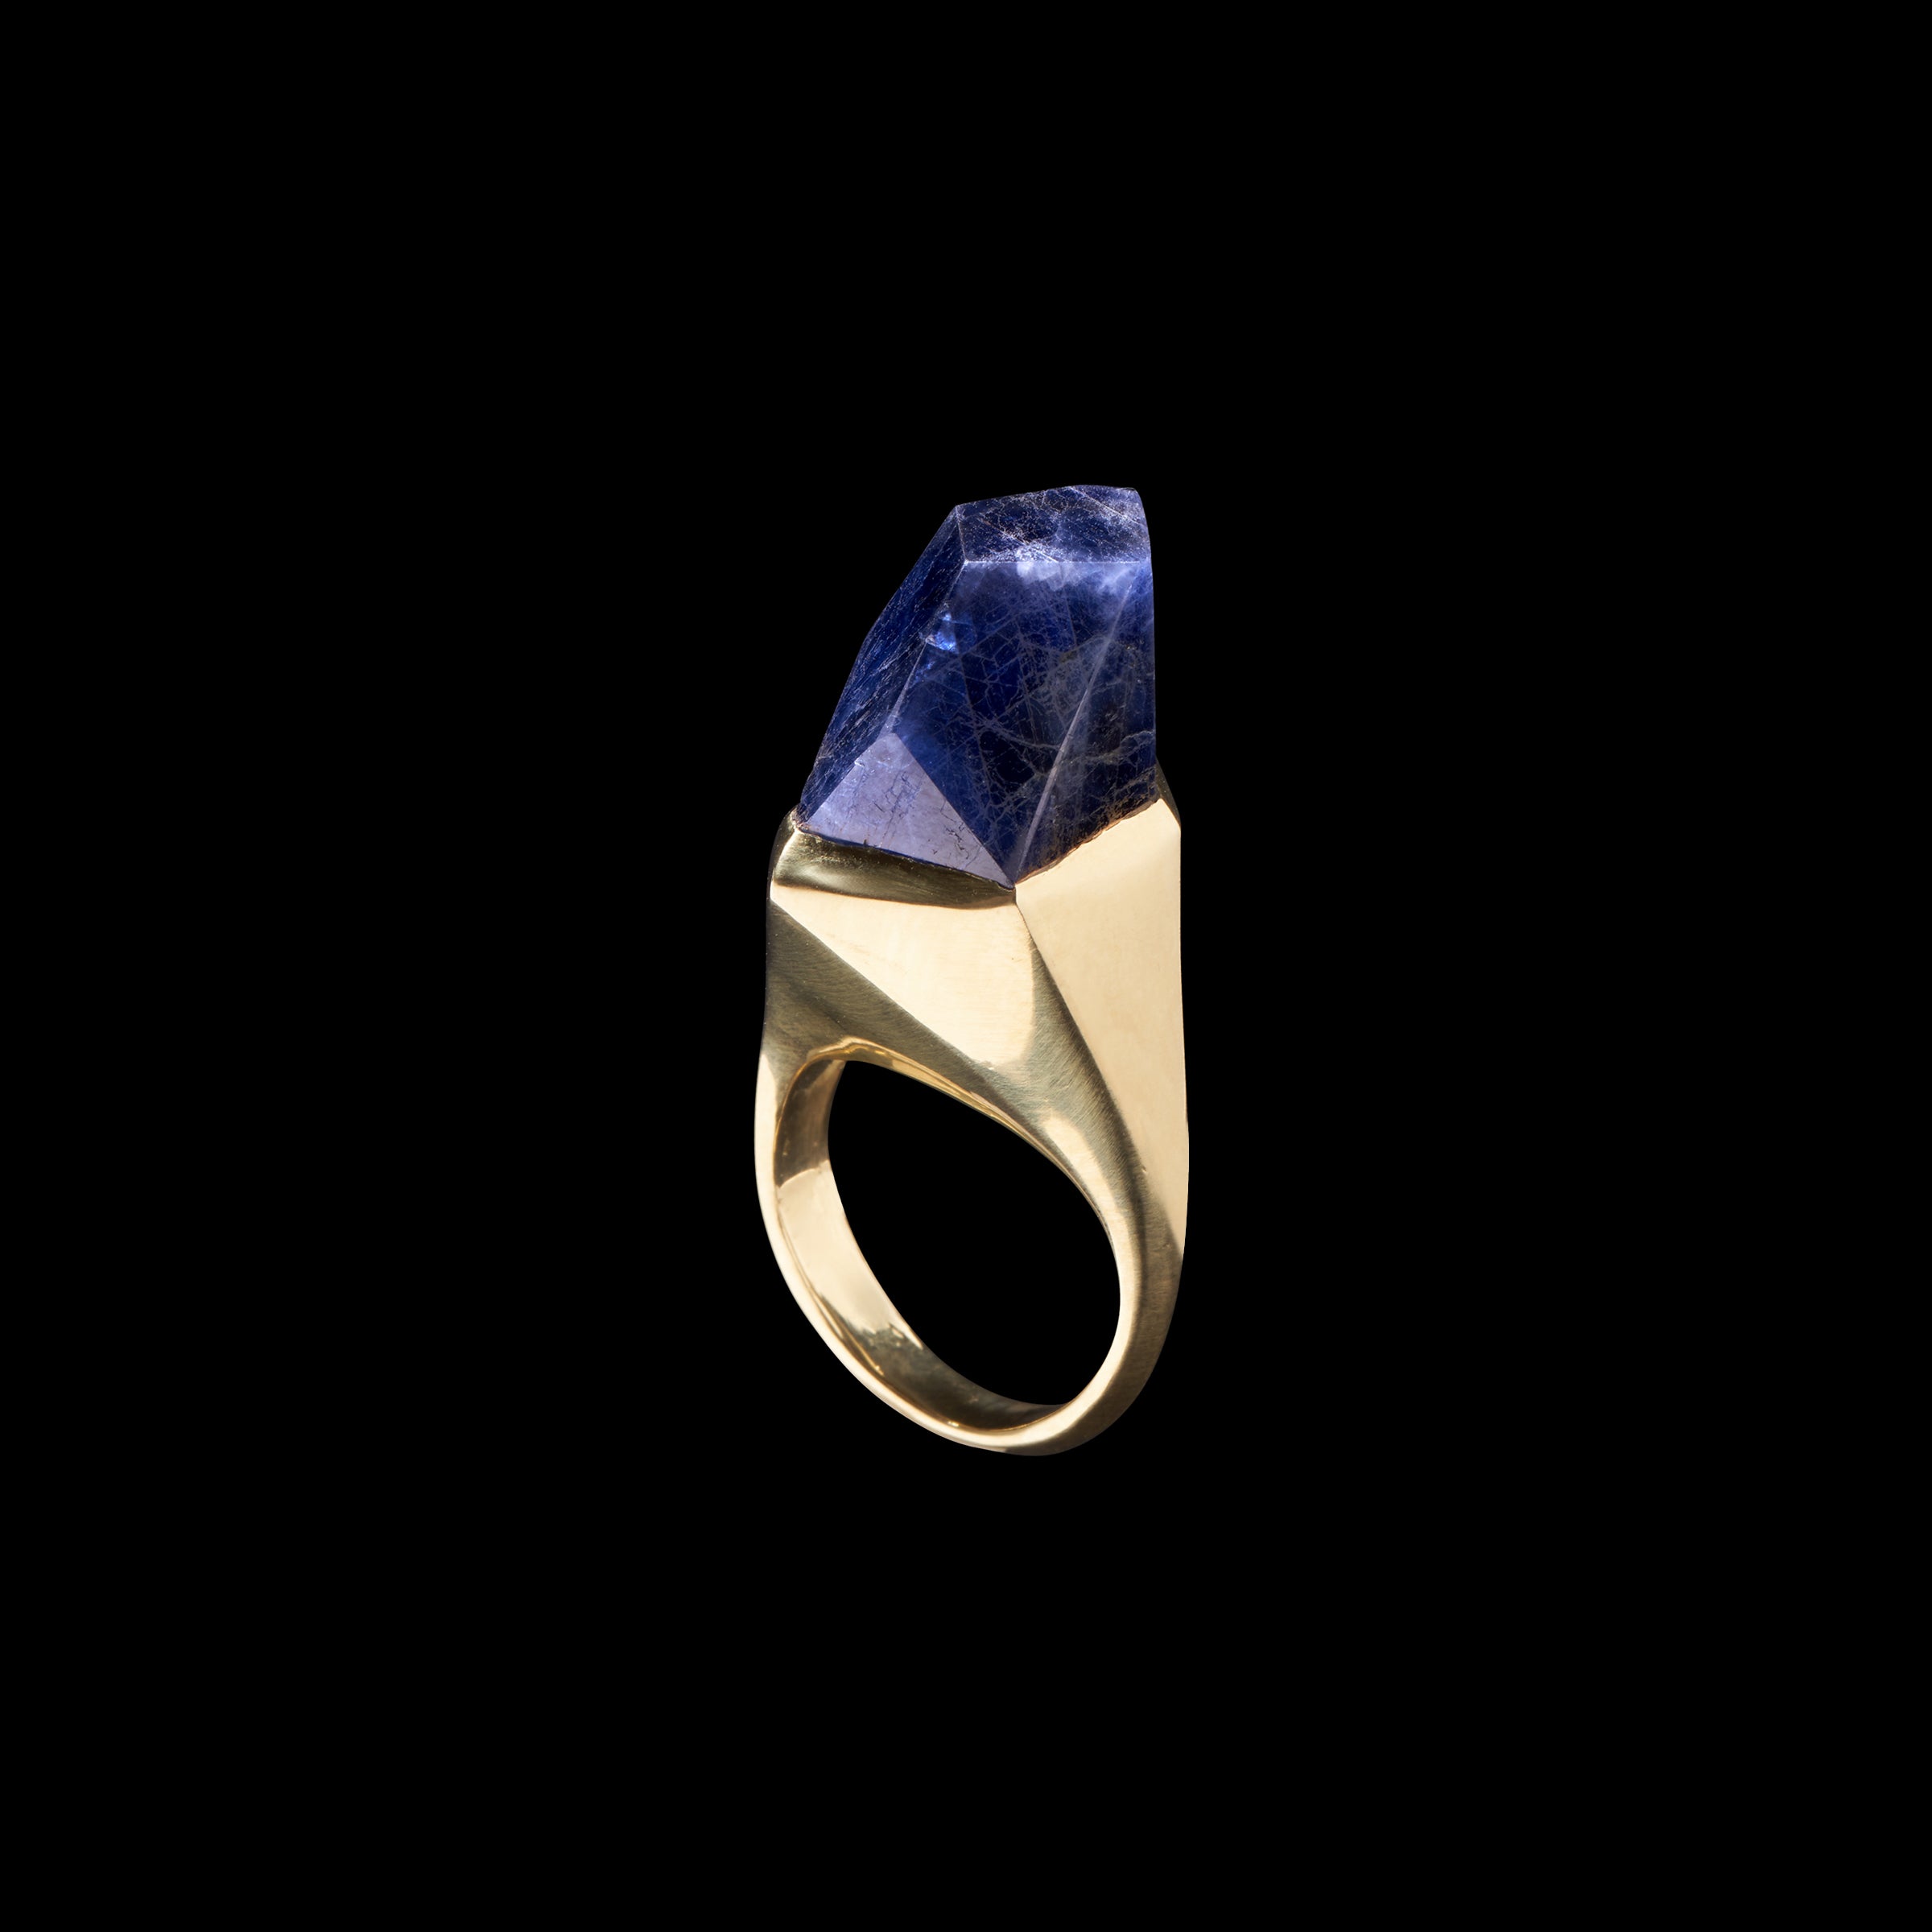 Madagascar Sapphire Faceted Ring